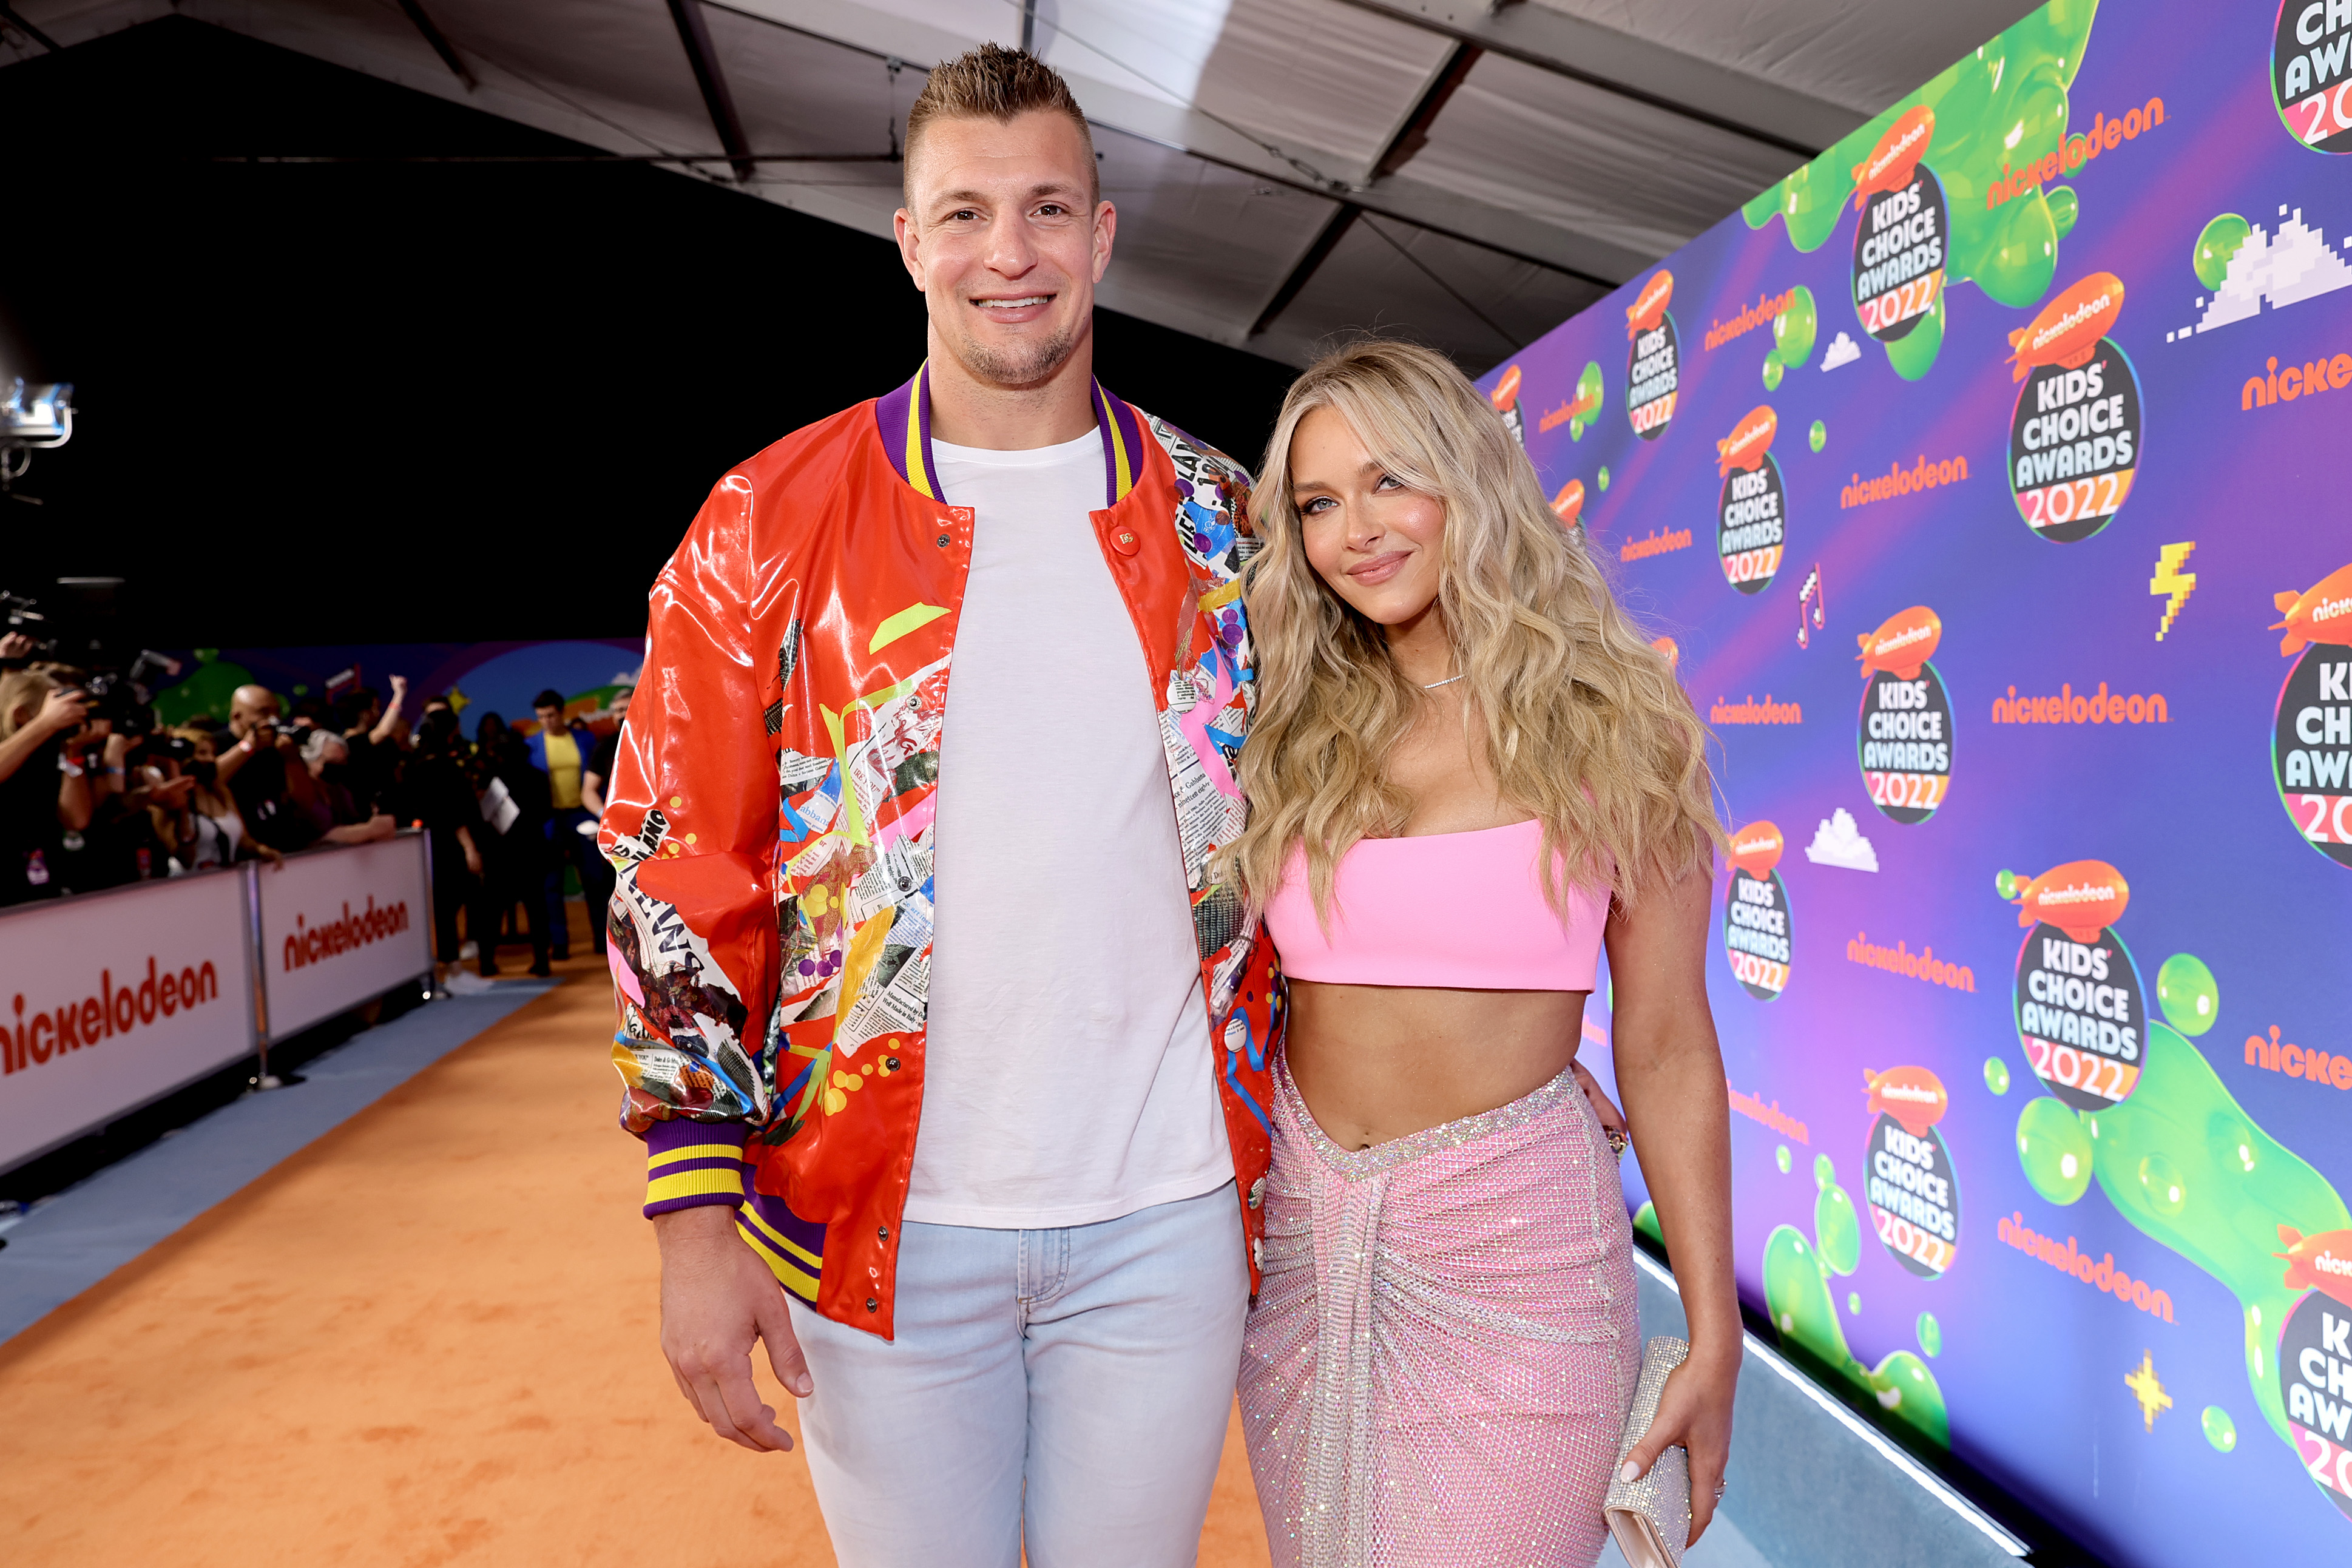 How Much Older Is Rob Gronkowski Than His Girlfriend Camille Kostek?